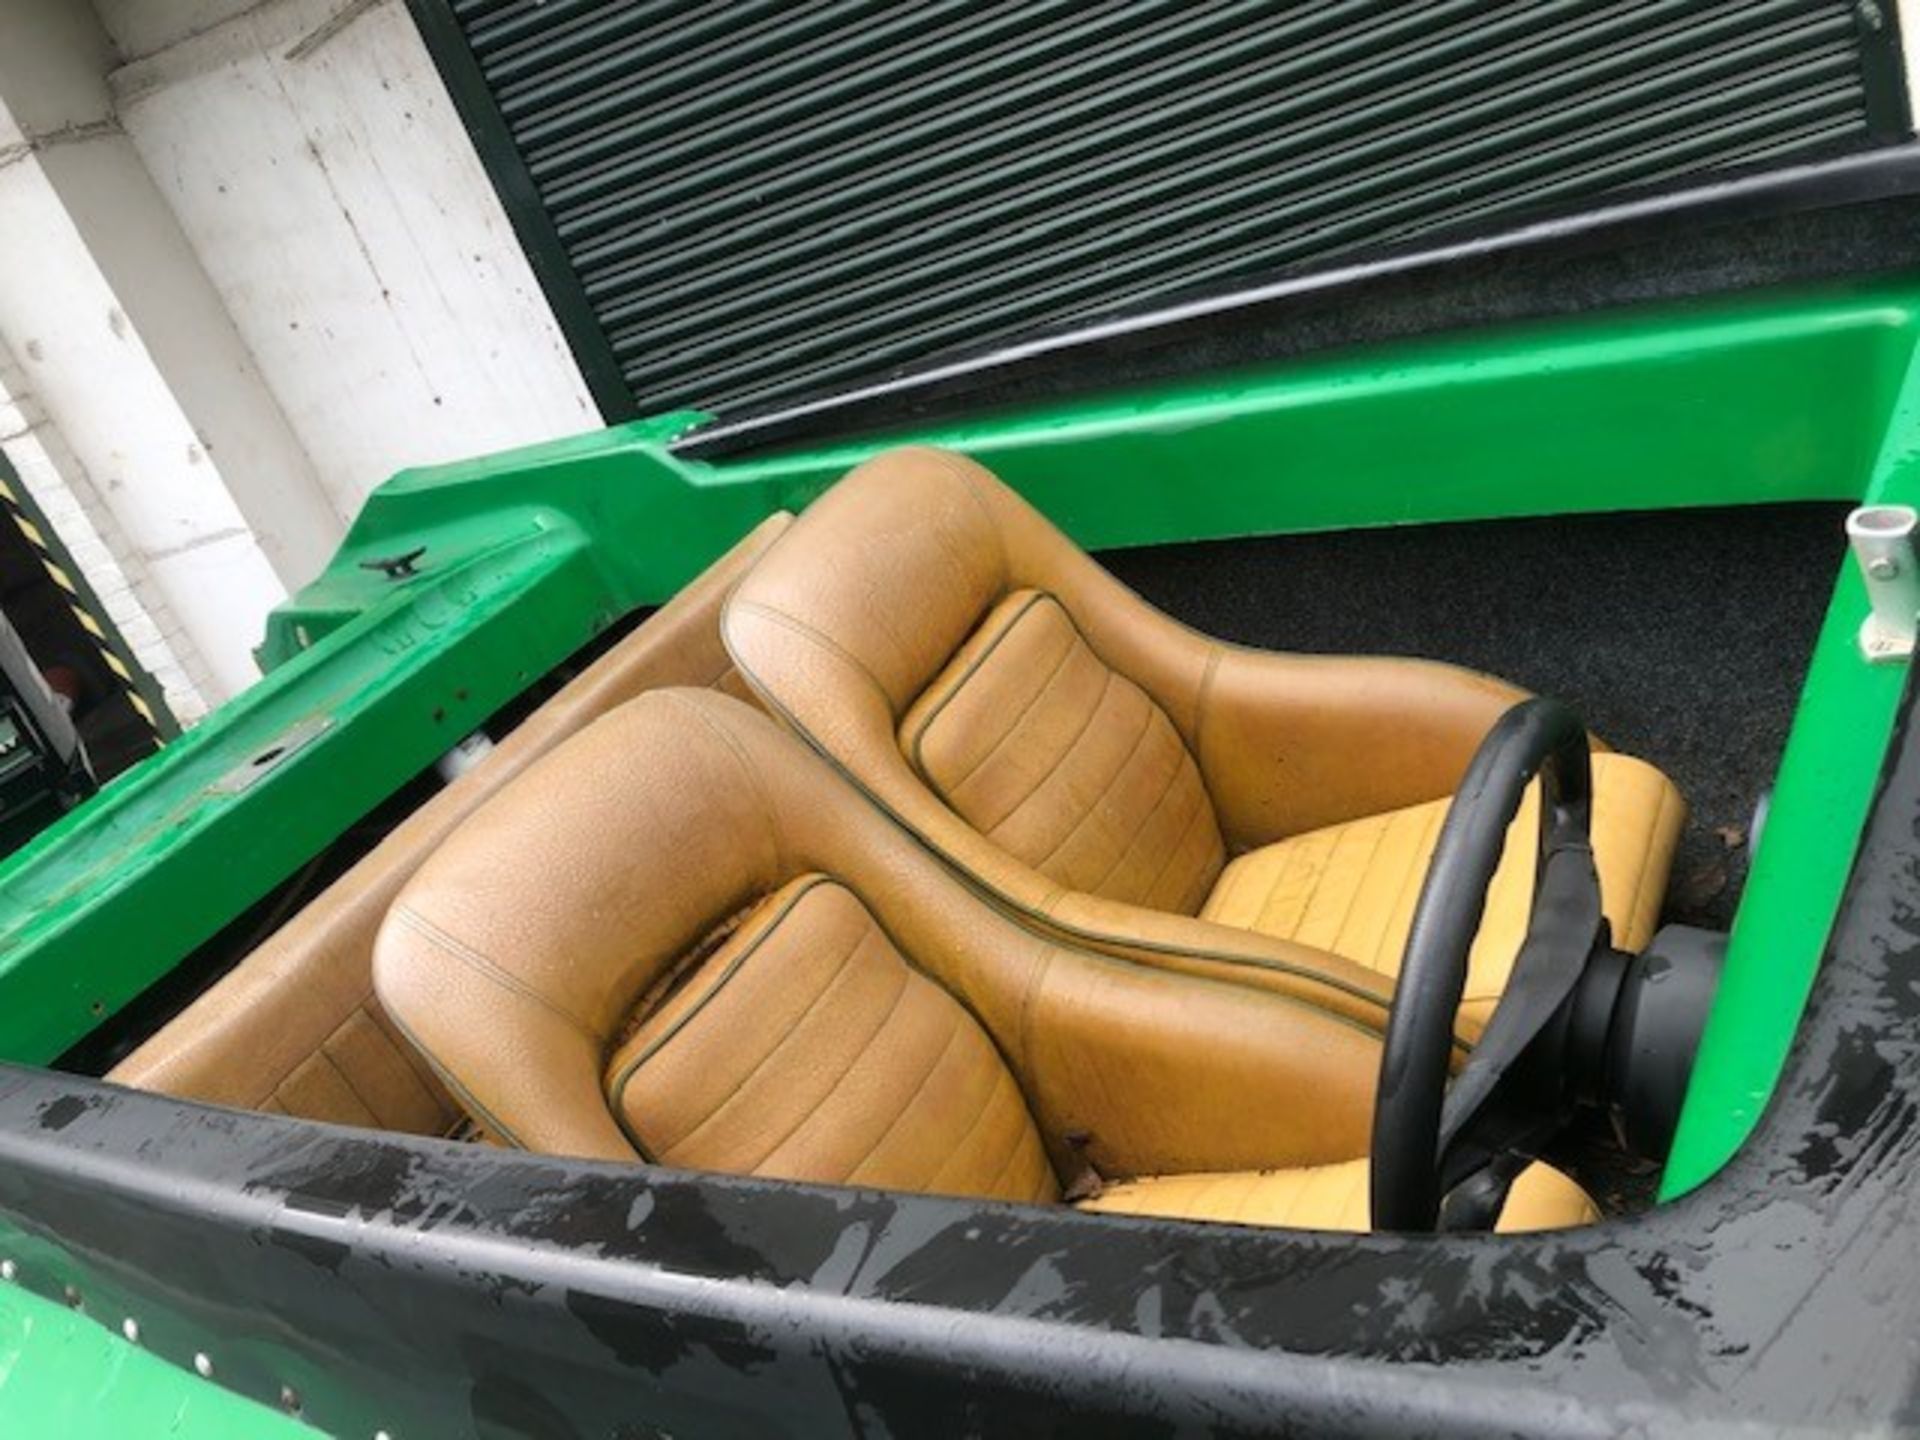 Ring 16ft Four Person Speedboat & Road Trailer A/F - Located in Romsey SO51 6AE - No 2 stroke Filler - Image 2 of 5